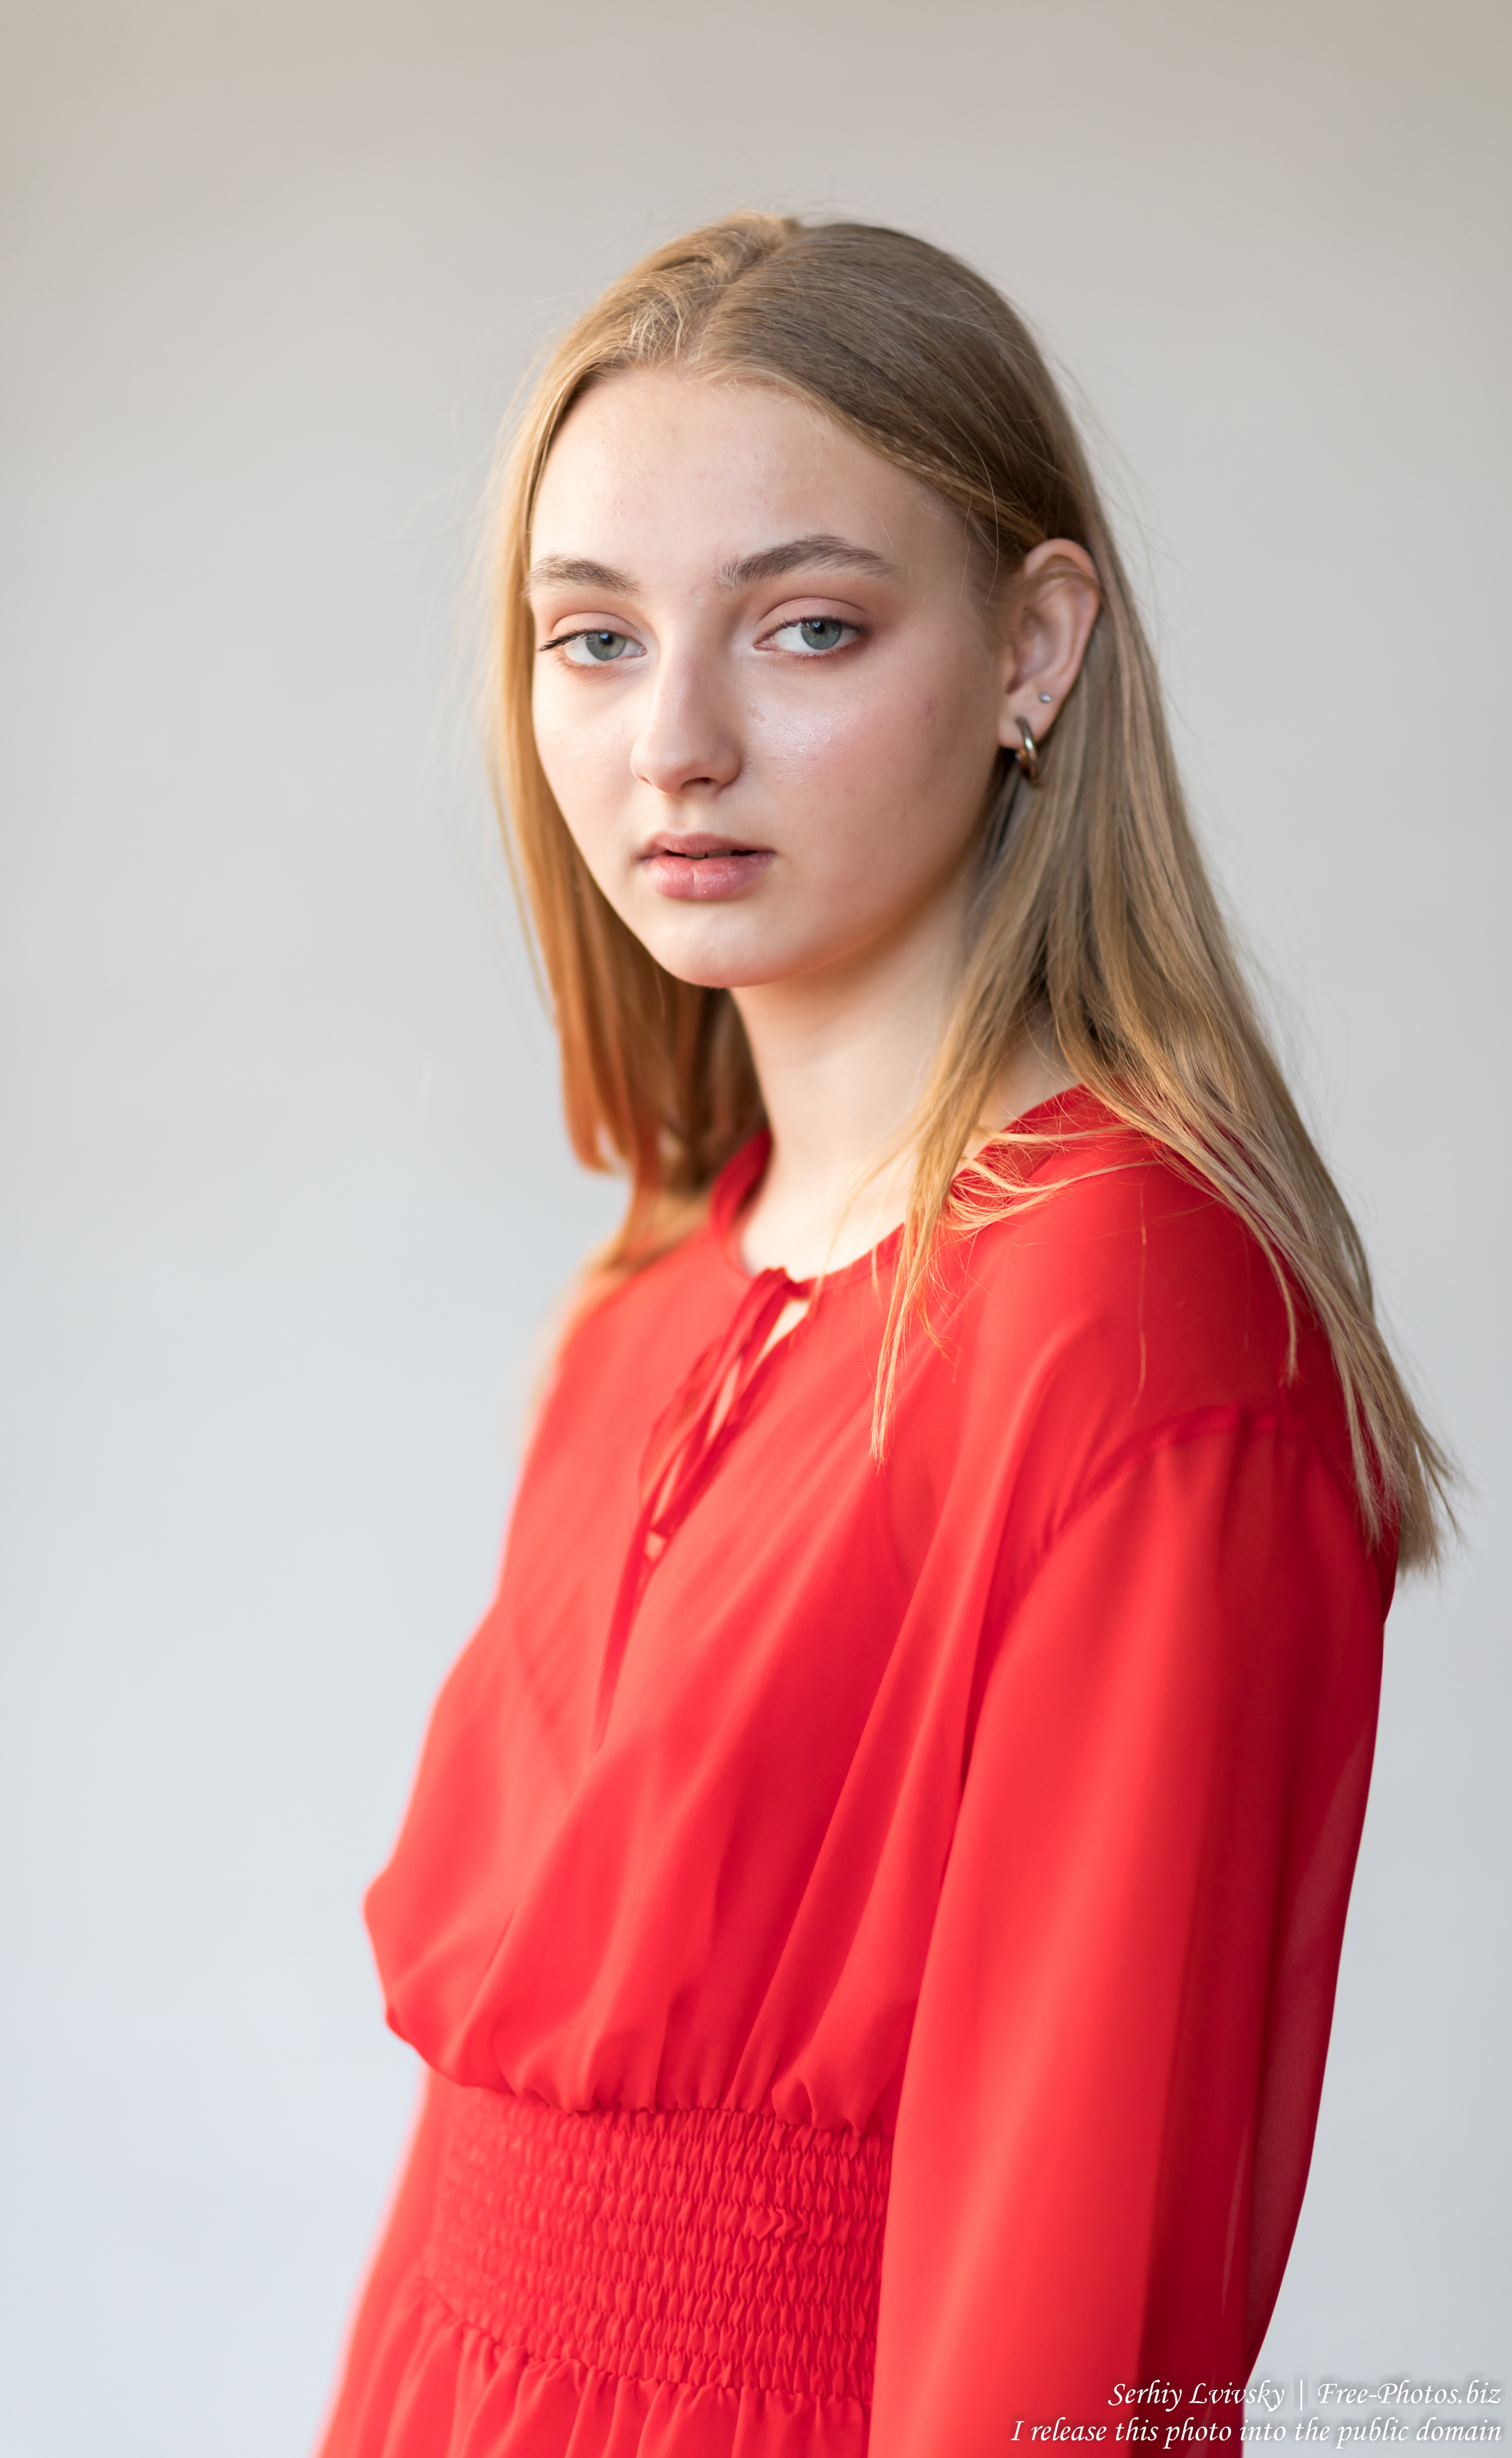 nastia_a_16-year-old_natural_blonde_girl_photographed_in_september_2019_by_serhiy_lvivsky_01